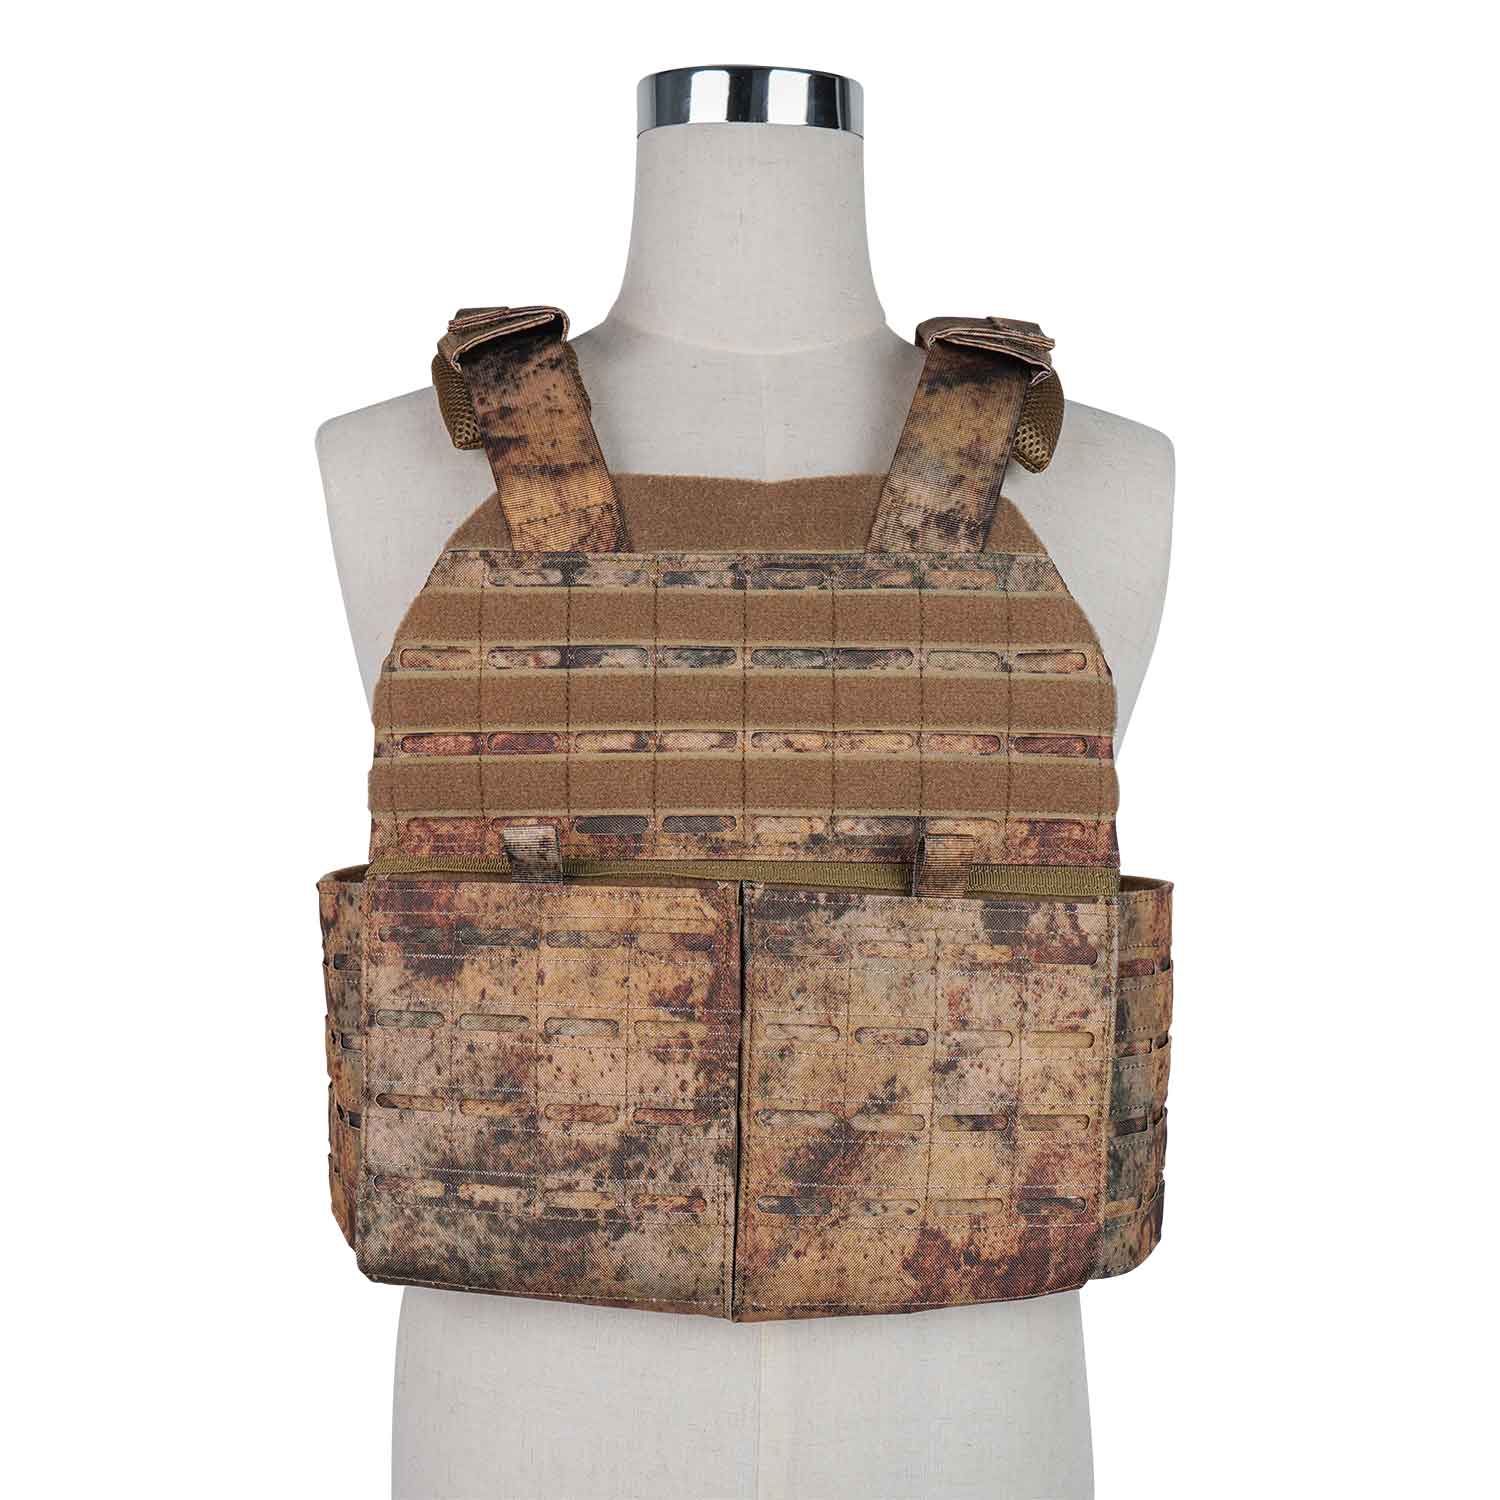 Buy Body Armor Military Wholesale Designer Fashion Bullet Proof Vest  Carrier, Multi-functional Light Weight Bulletproof Plate Sell from Shenzhen  HaiSheng Security Technology Co., Ltd., China